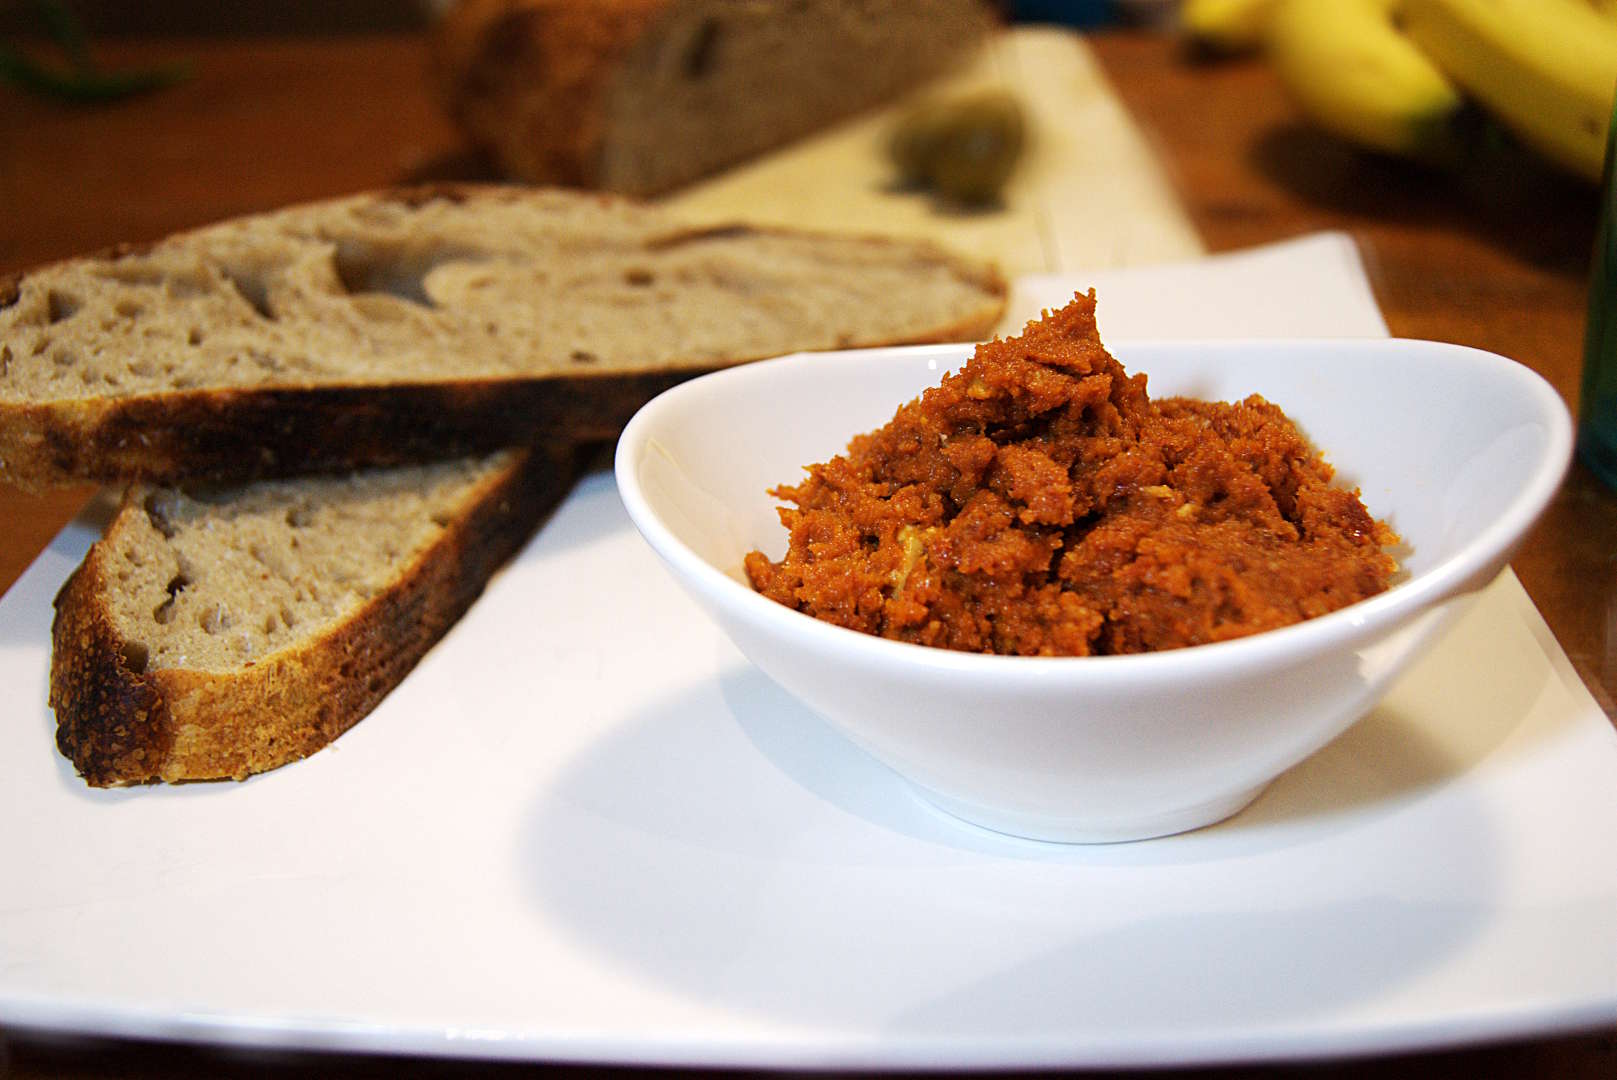 Sun-dried Tomato and Olive Tapenade